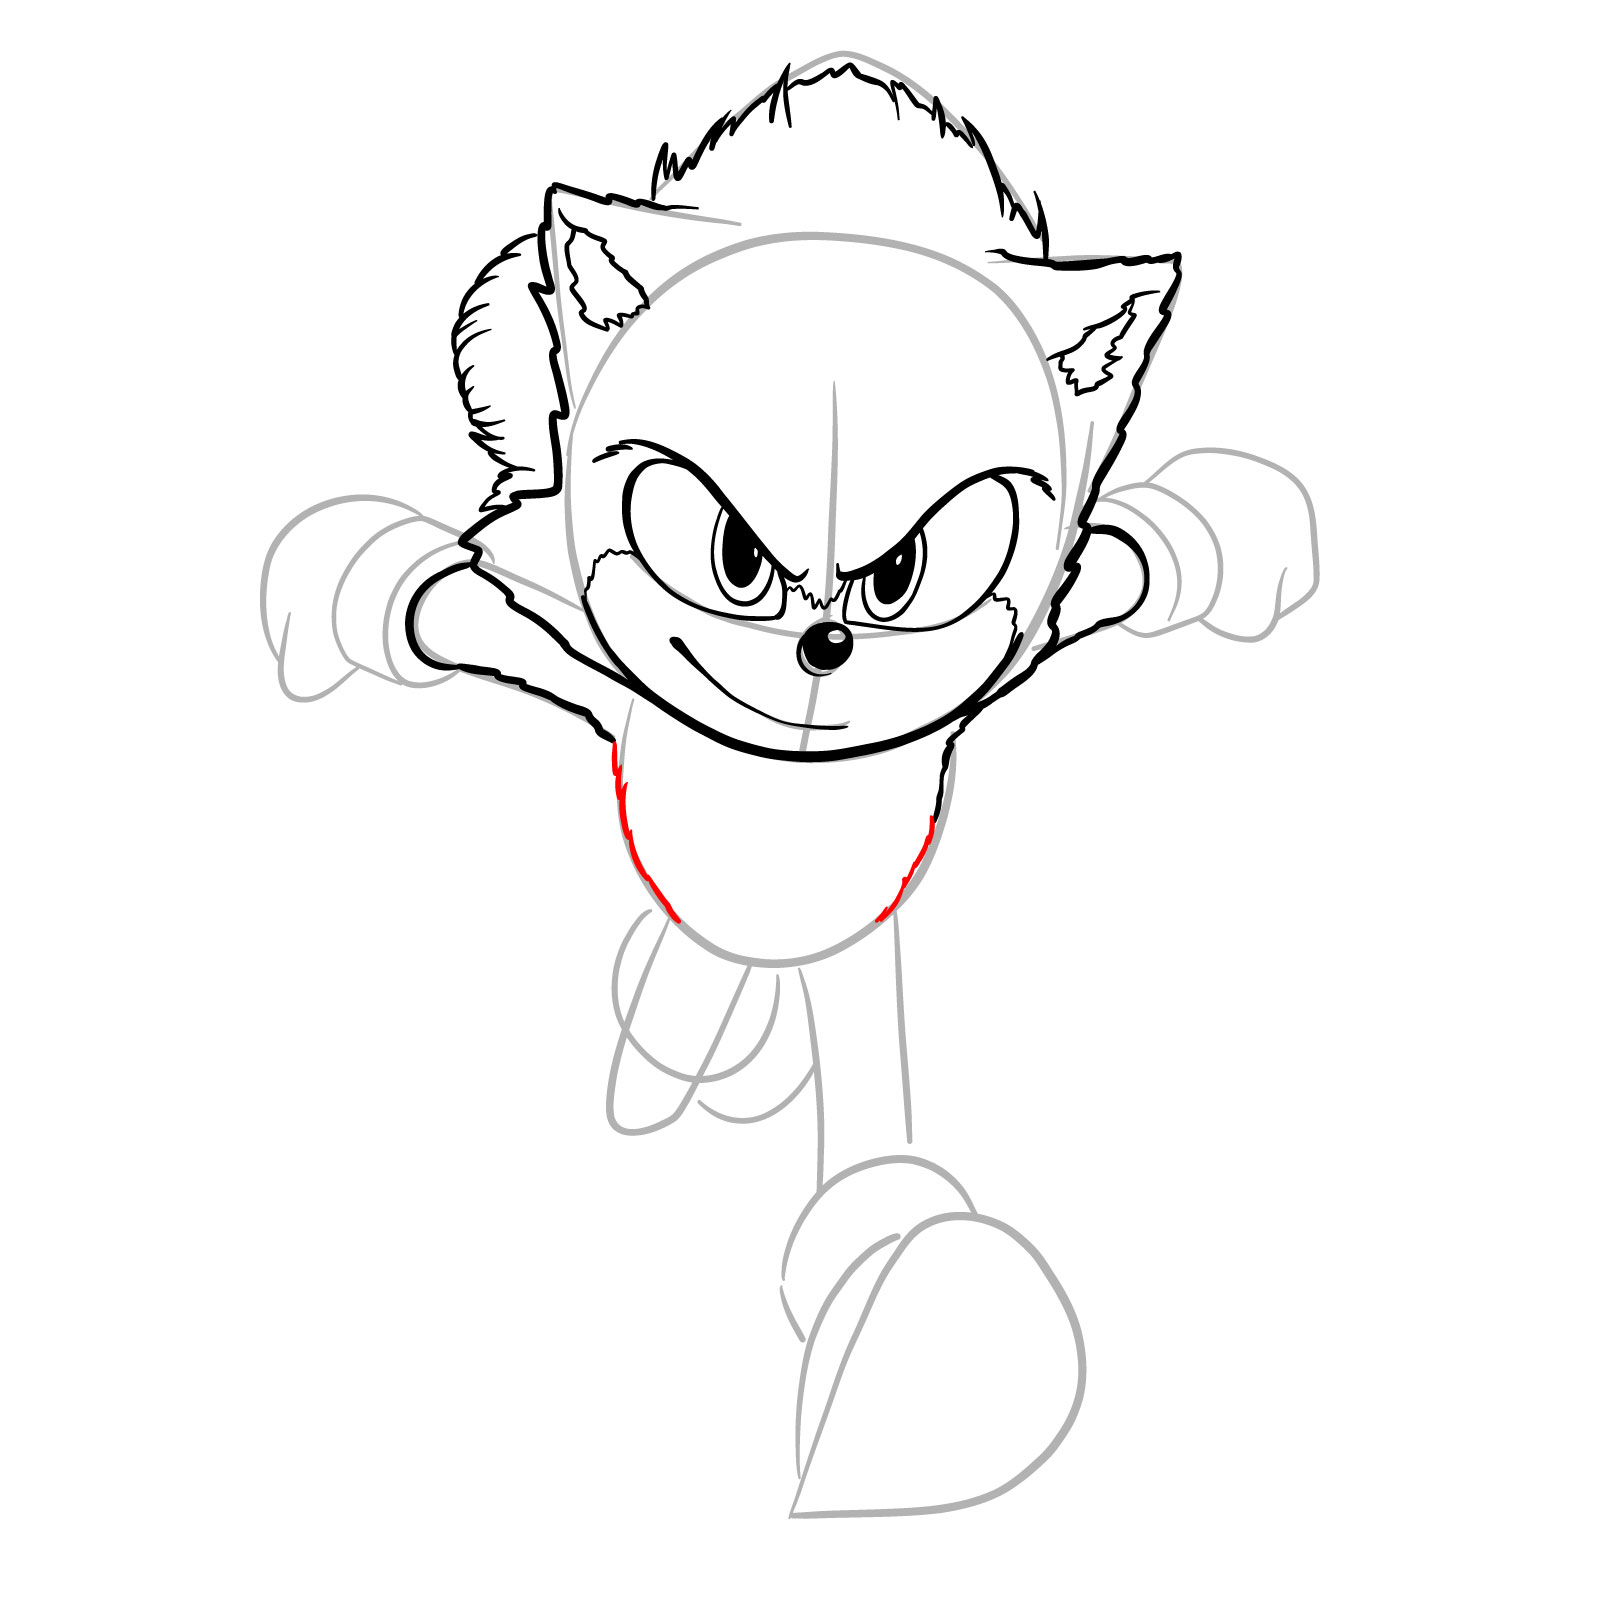 How to draw Sonic from the movie - step 16